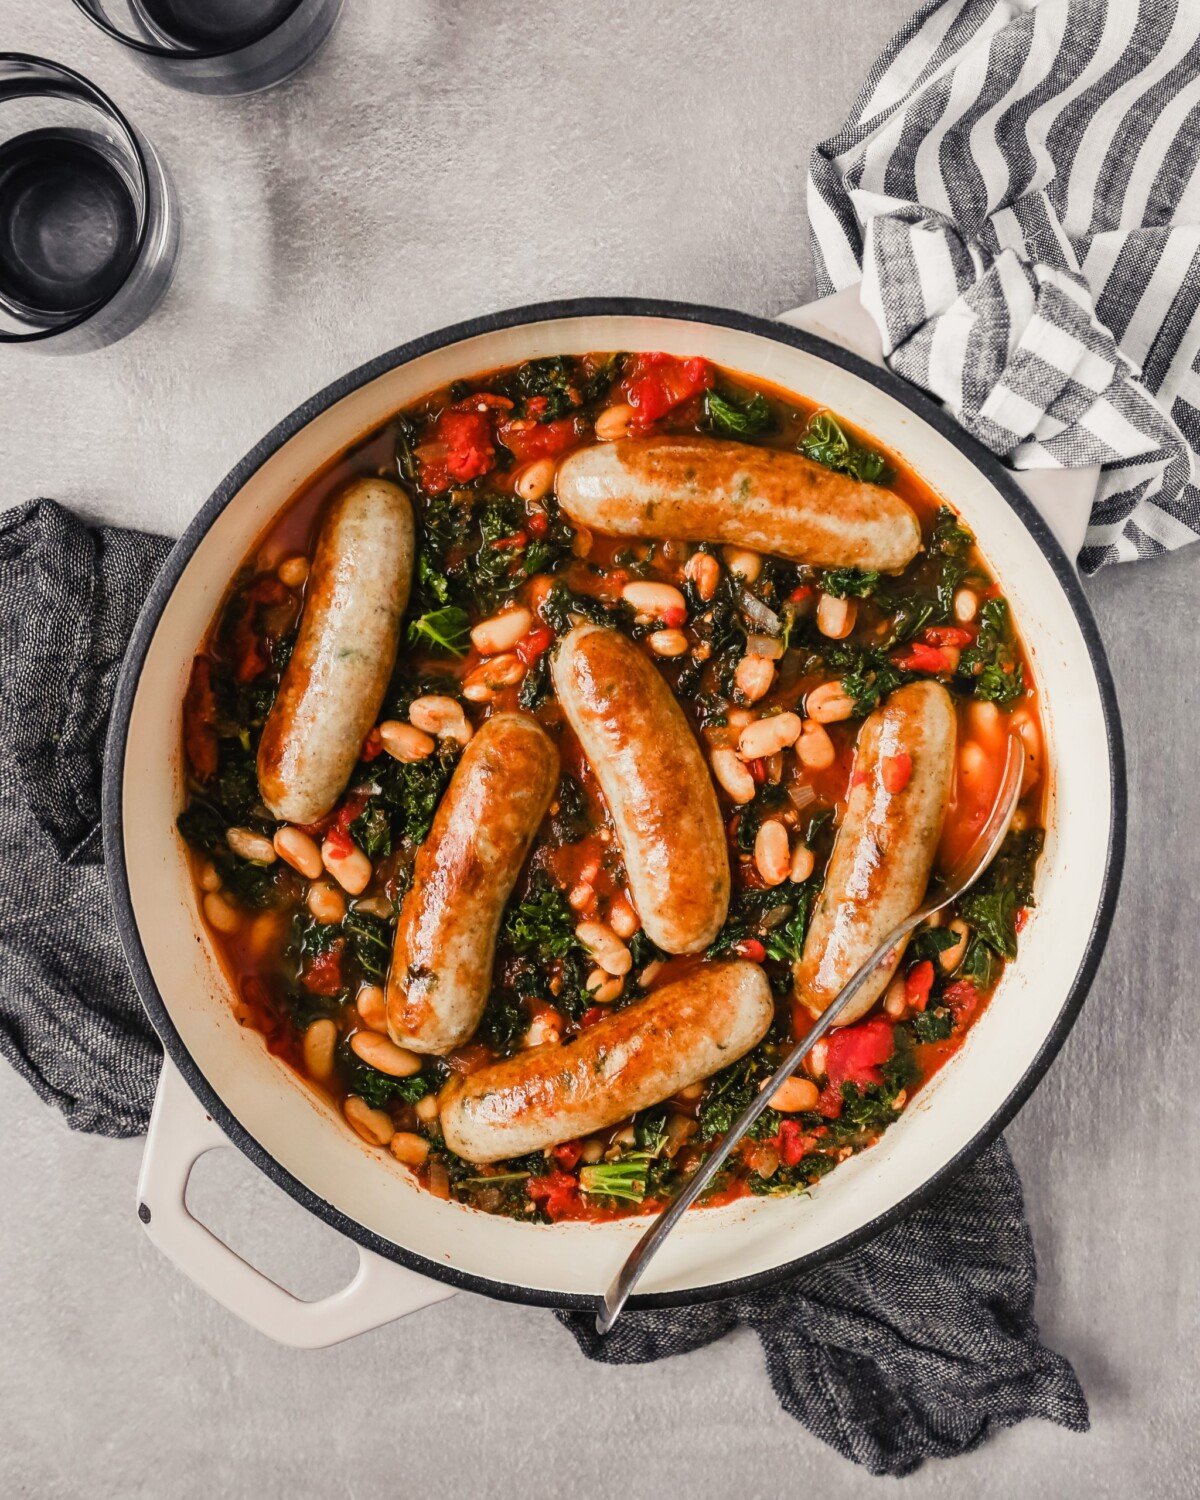 Overhead photograph of a Dutch oven filled with Italian chicken sausages stewed in tomatoes, kale and white beans